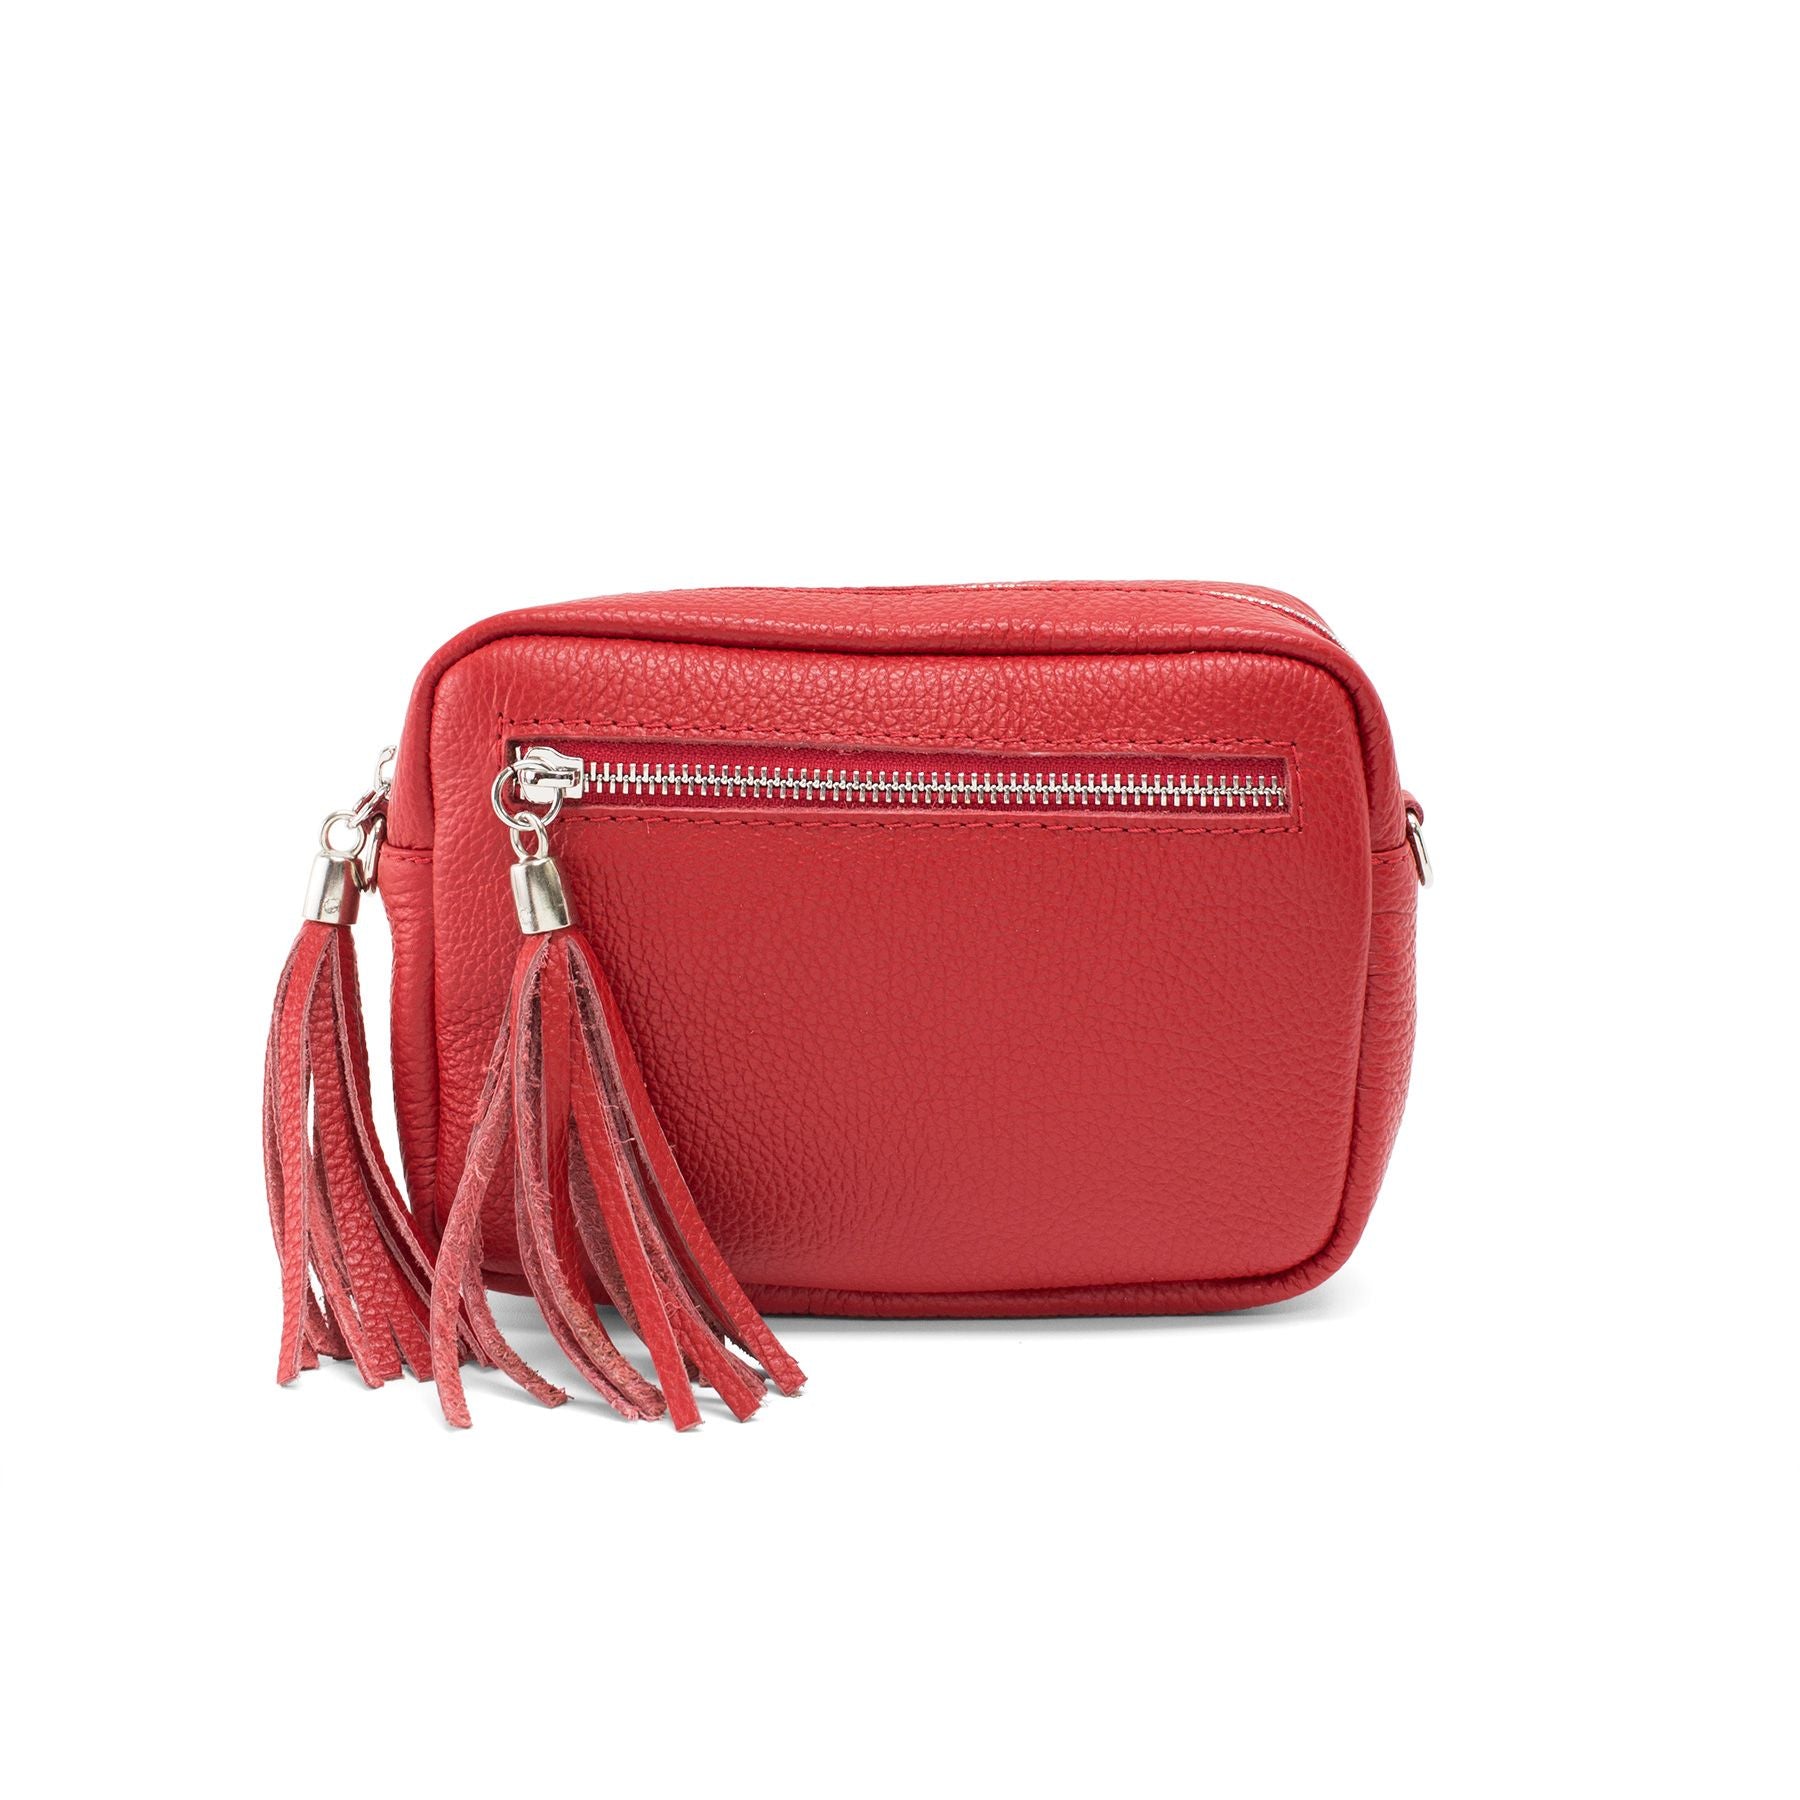 Red leather cross body bag